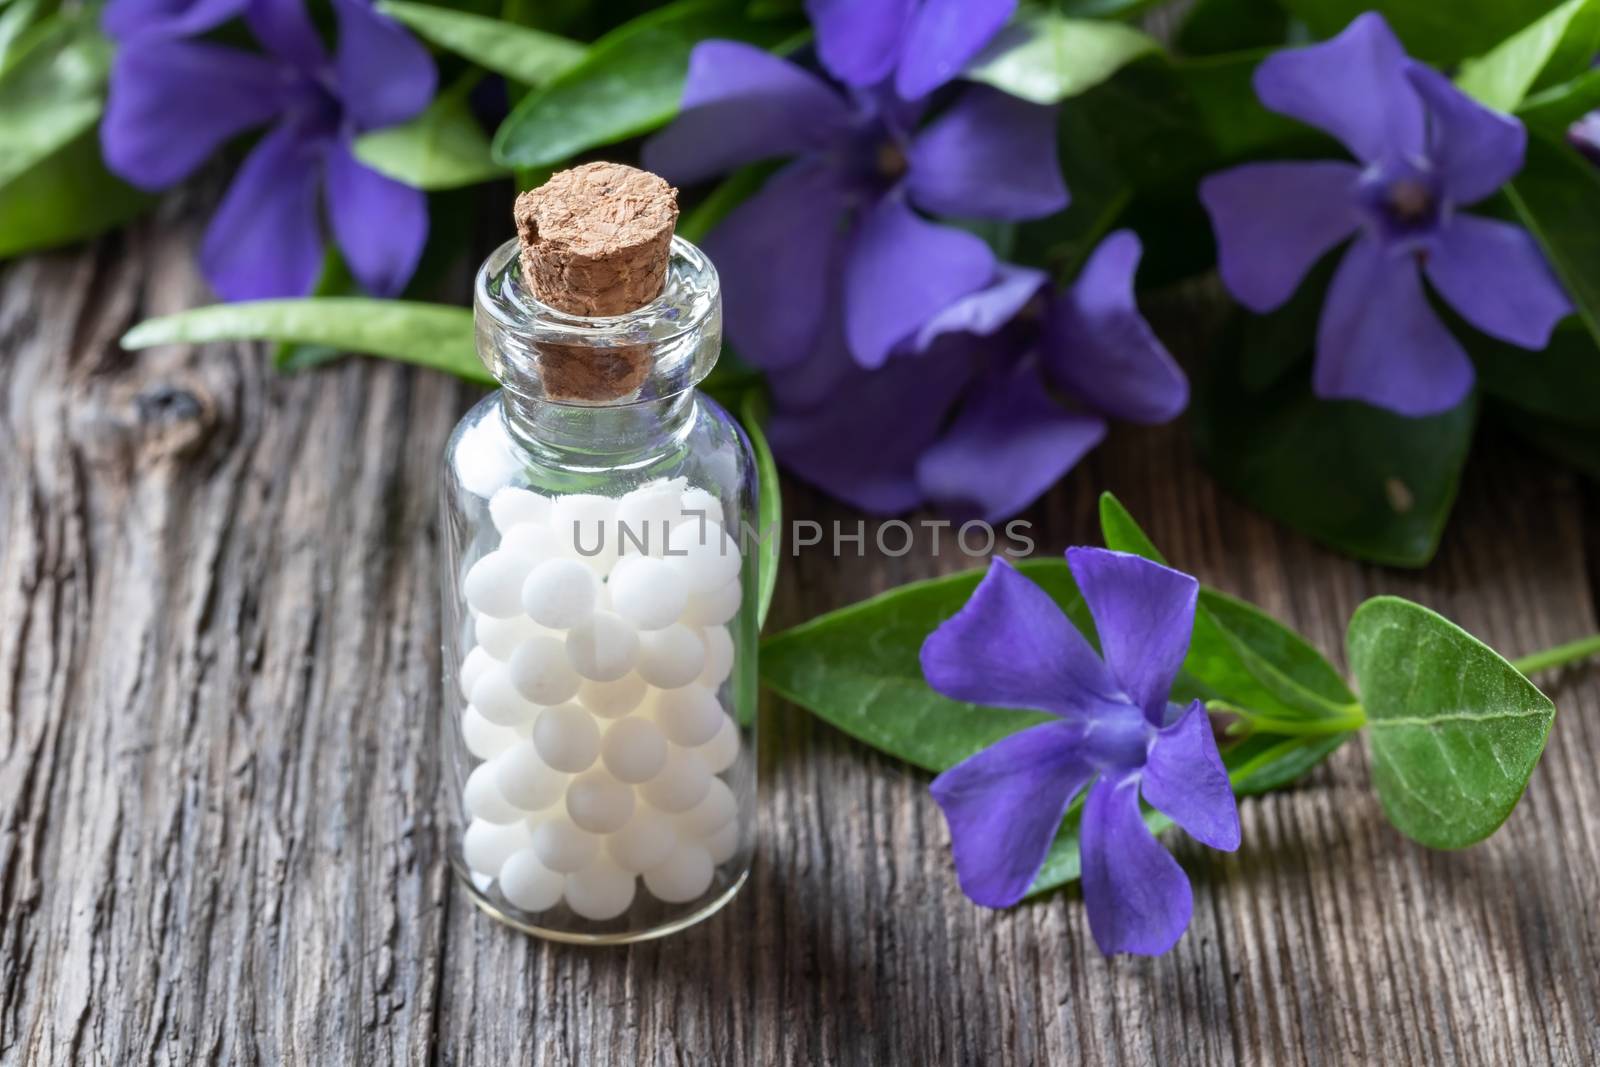 A bottle of vinca minor homeopathic remedy with fresh lesser periwinkle plant